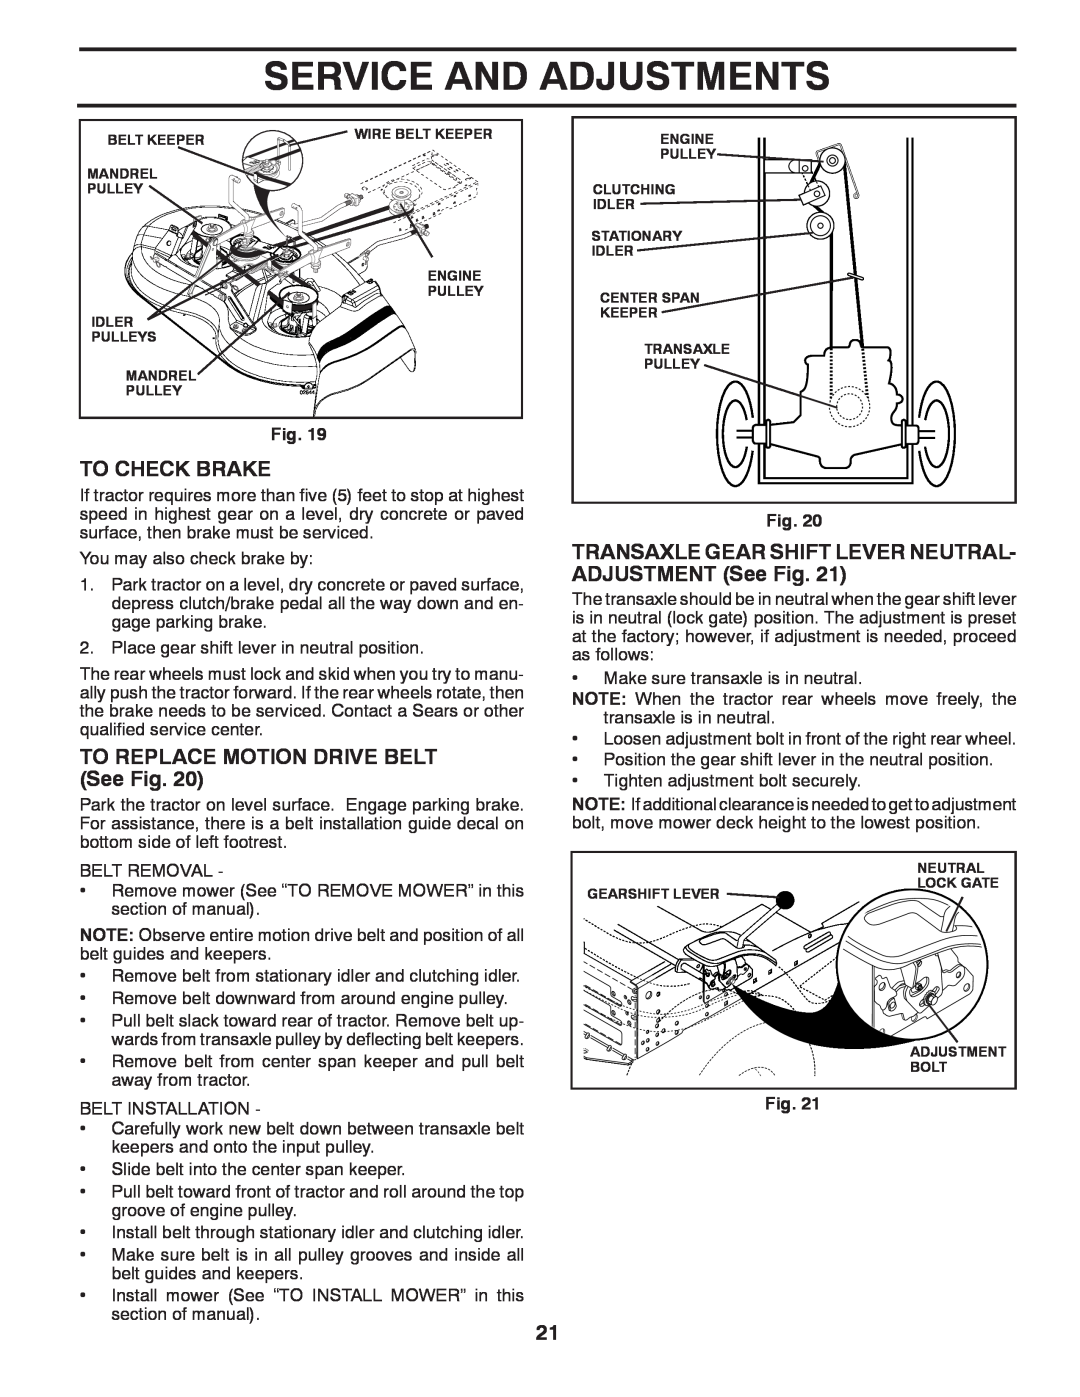 Weed Eater 96018000100, 435073 manual To Check Brake, TO REPLACE MOTION DRIVE BELT See Fig, Service And Adjustments 